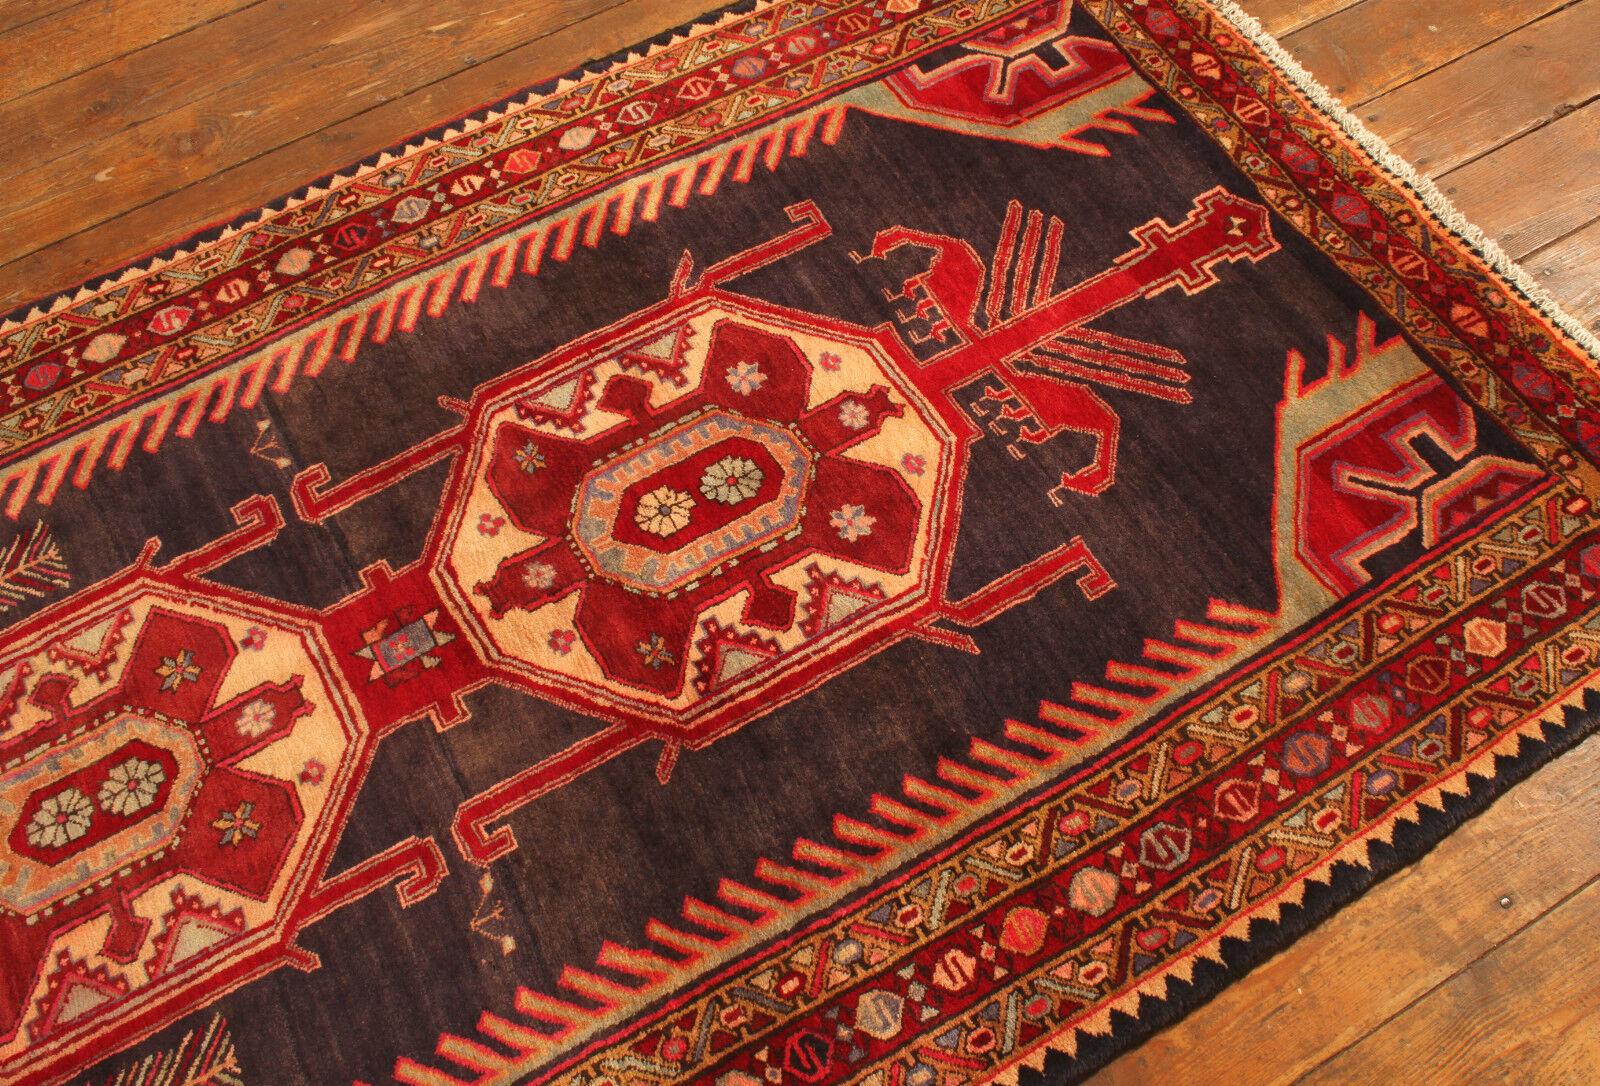 Handmade Vintage Persian Style Malayer Rug

Dimensions: 4.2’ x 10.7’ (approximately 131 cm x 327 cm)
Material: 100% Wool
Era: 1970s
Condition: Good

Immerse yourself in the rich history of Persian weaving with this handmade Malayer rug from the